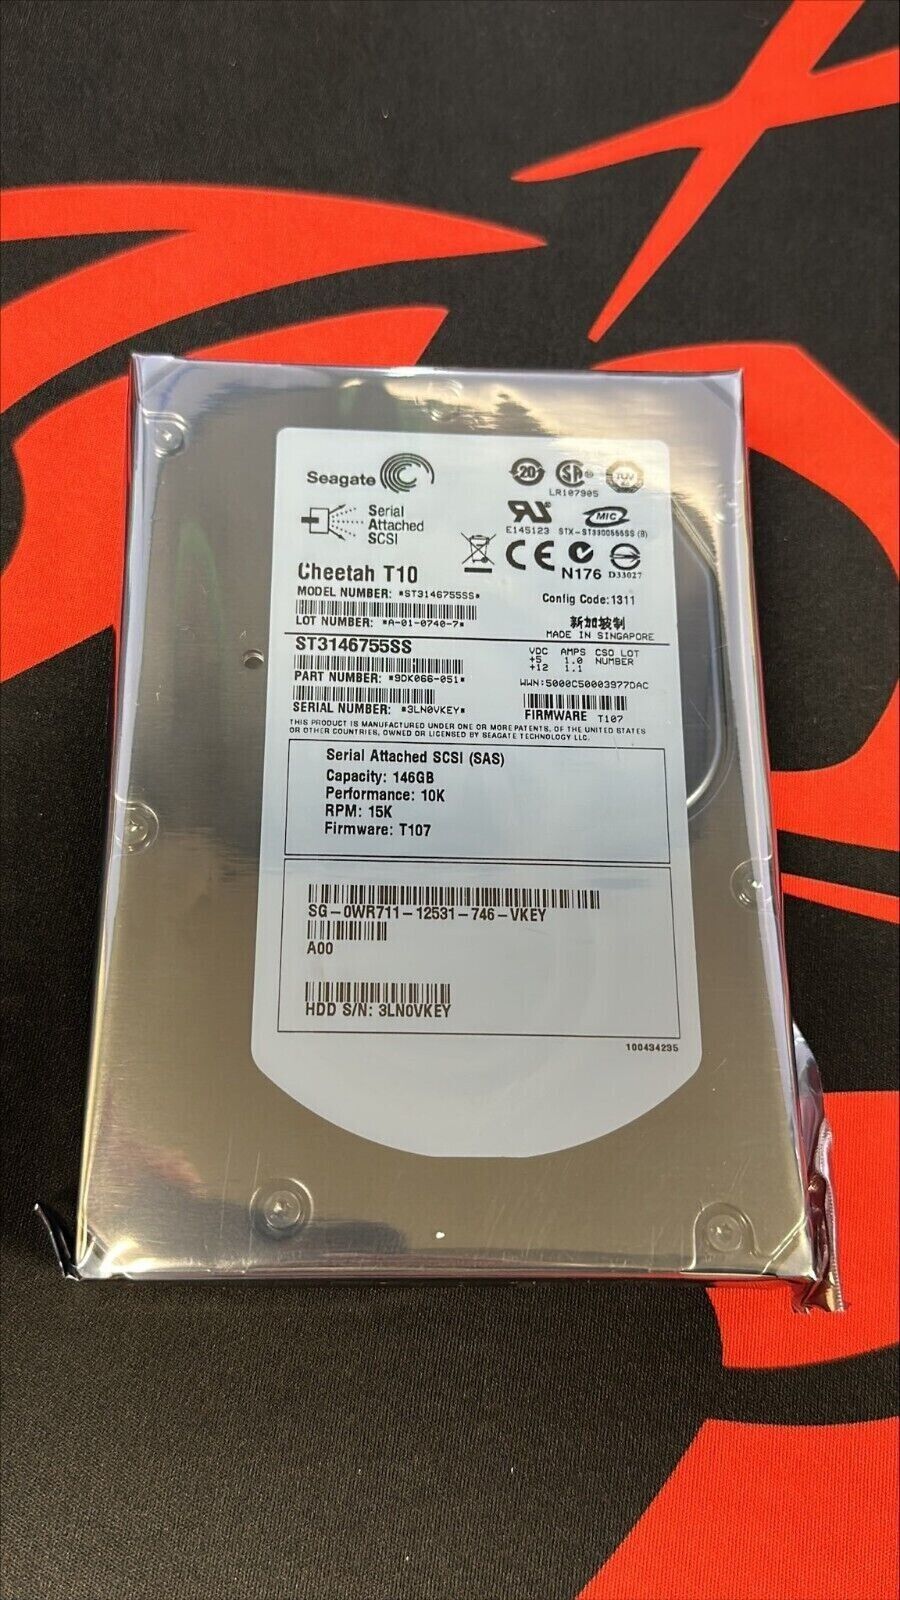 Primary image for *NEW ZERO HOURS*- ST3146755SS/WR711- Seagate 146Gb 10K U320 SAS Hard Disk Drive